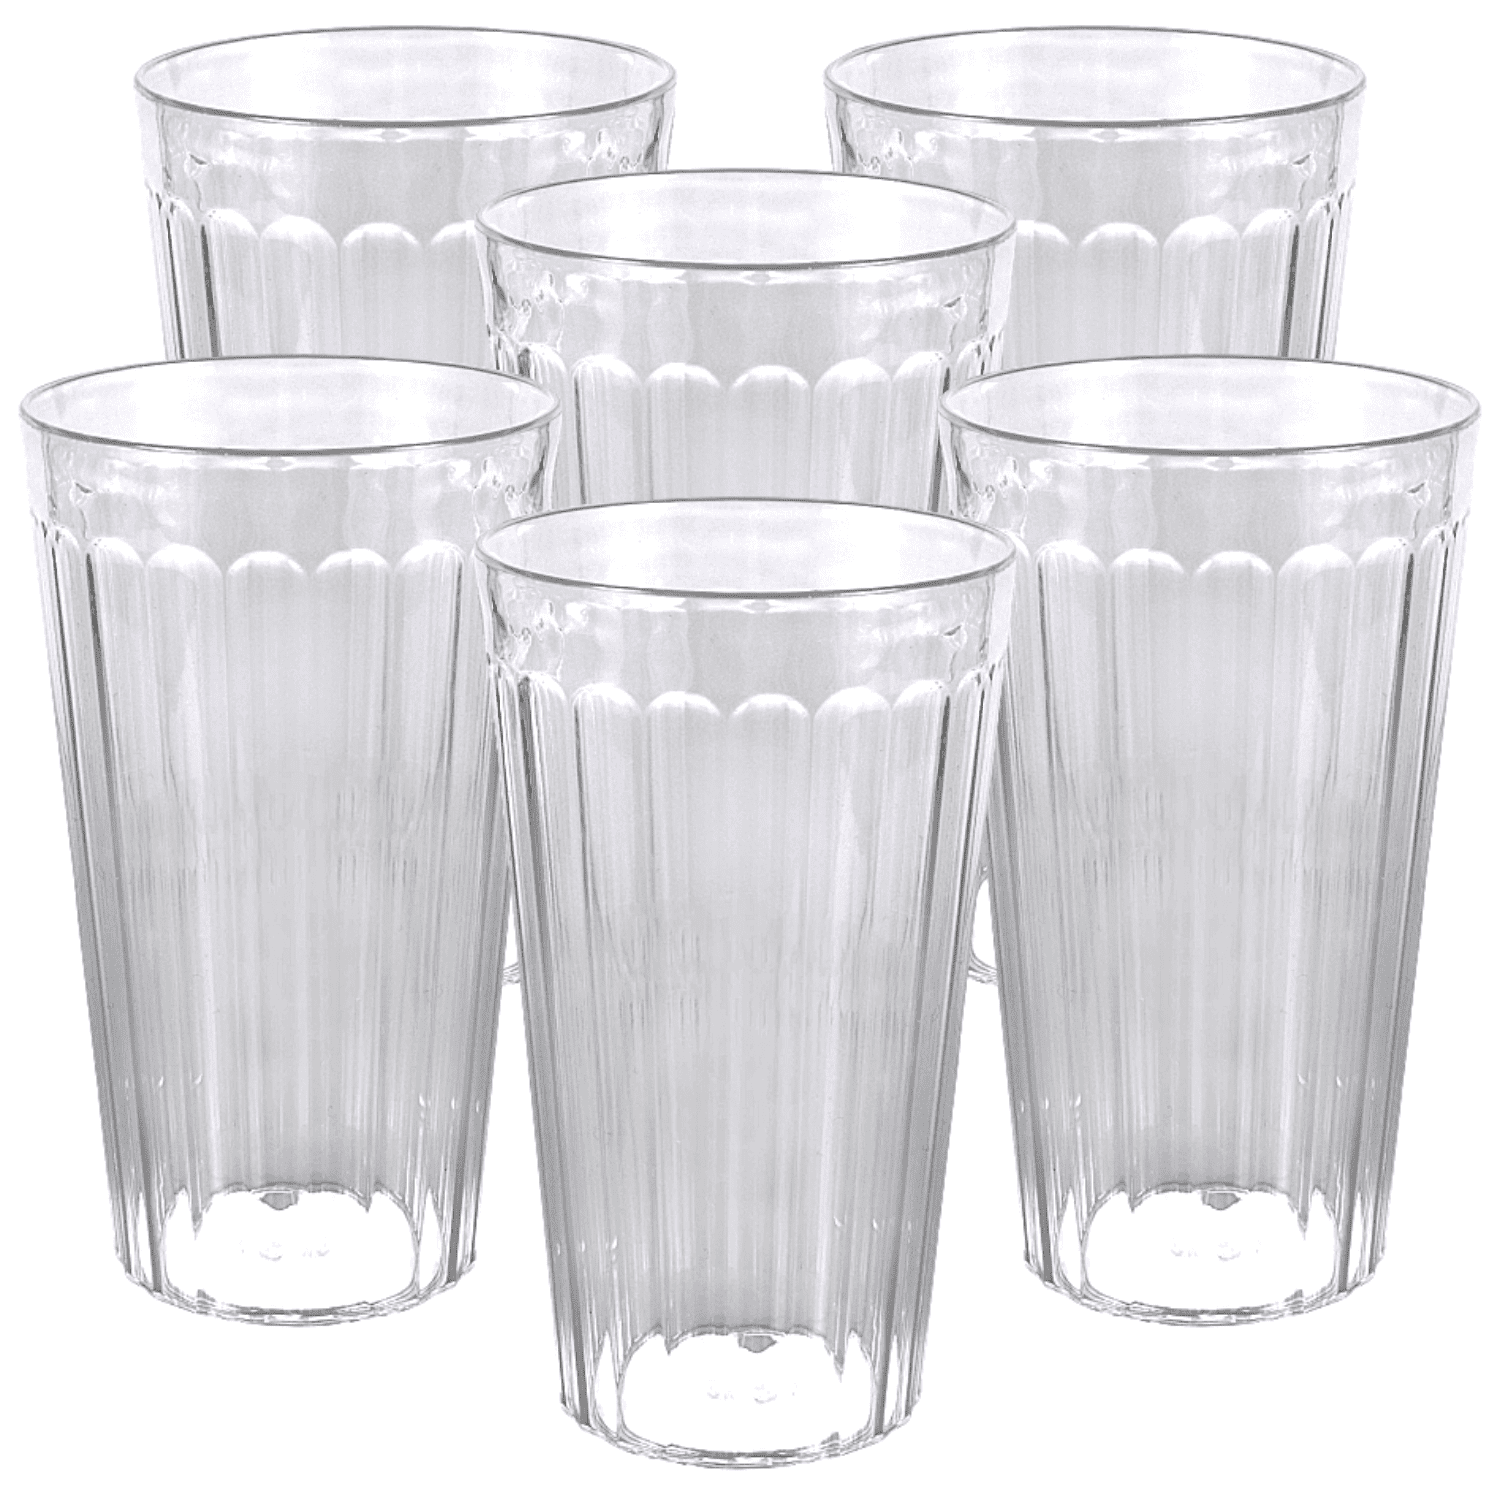 Tumbler Glass Set - Plastic Drinkware for Outdoor Use - Set of 4, Clear